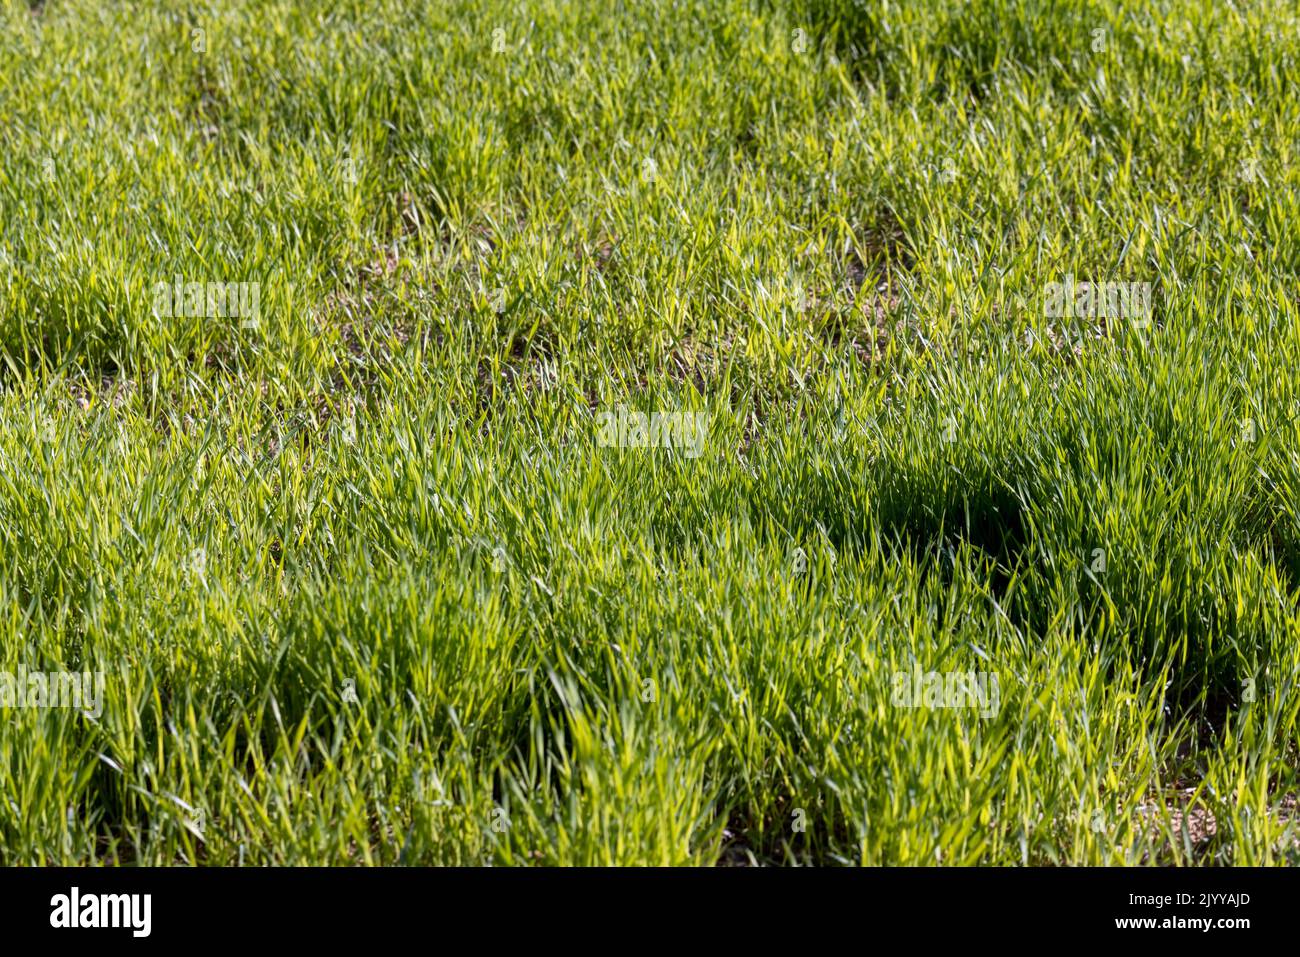 agricultural field where green unripe wheat grows, a large amount of cereal wheat for grain harvest Stock Photo